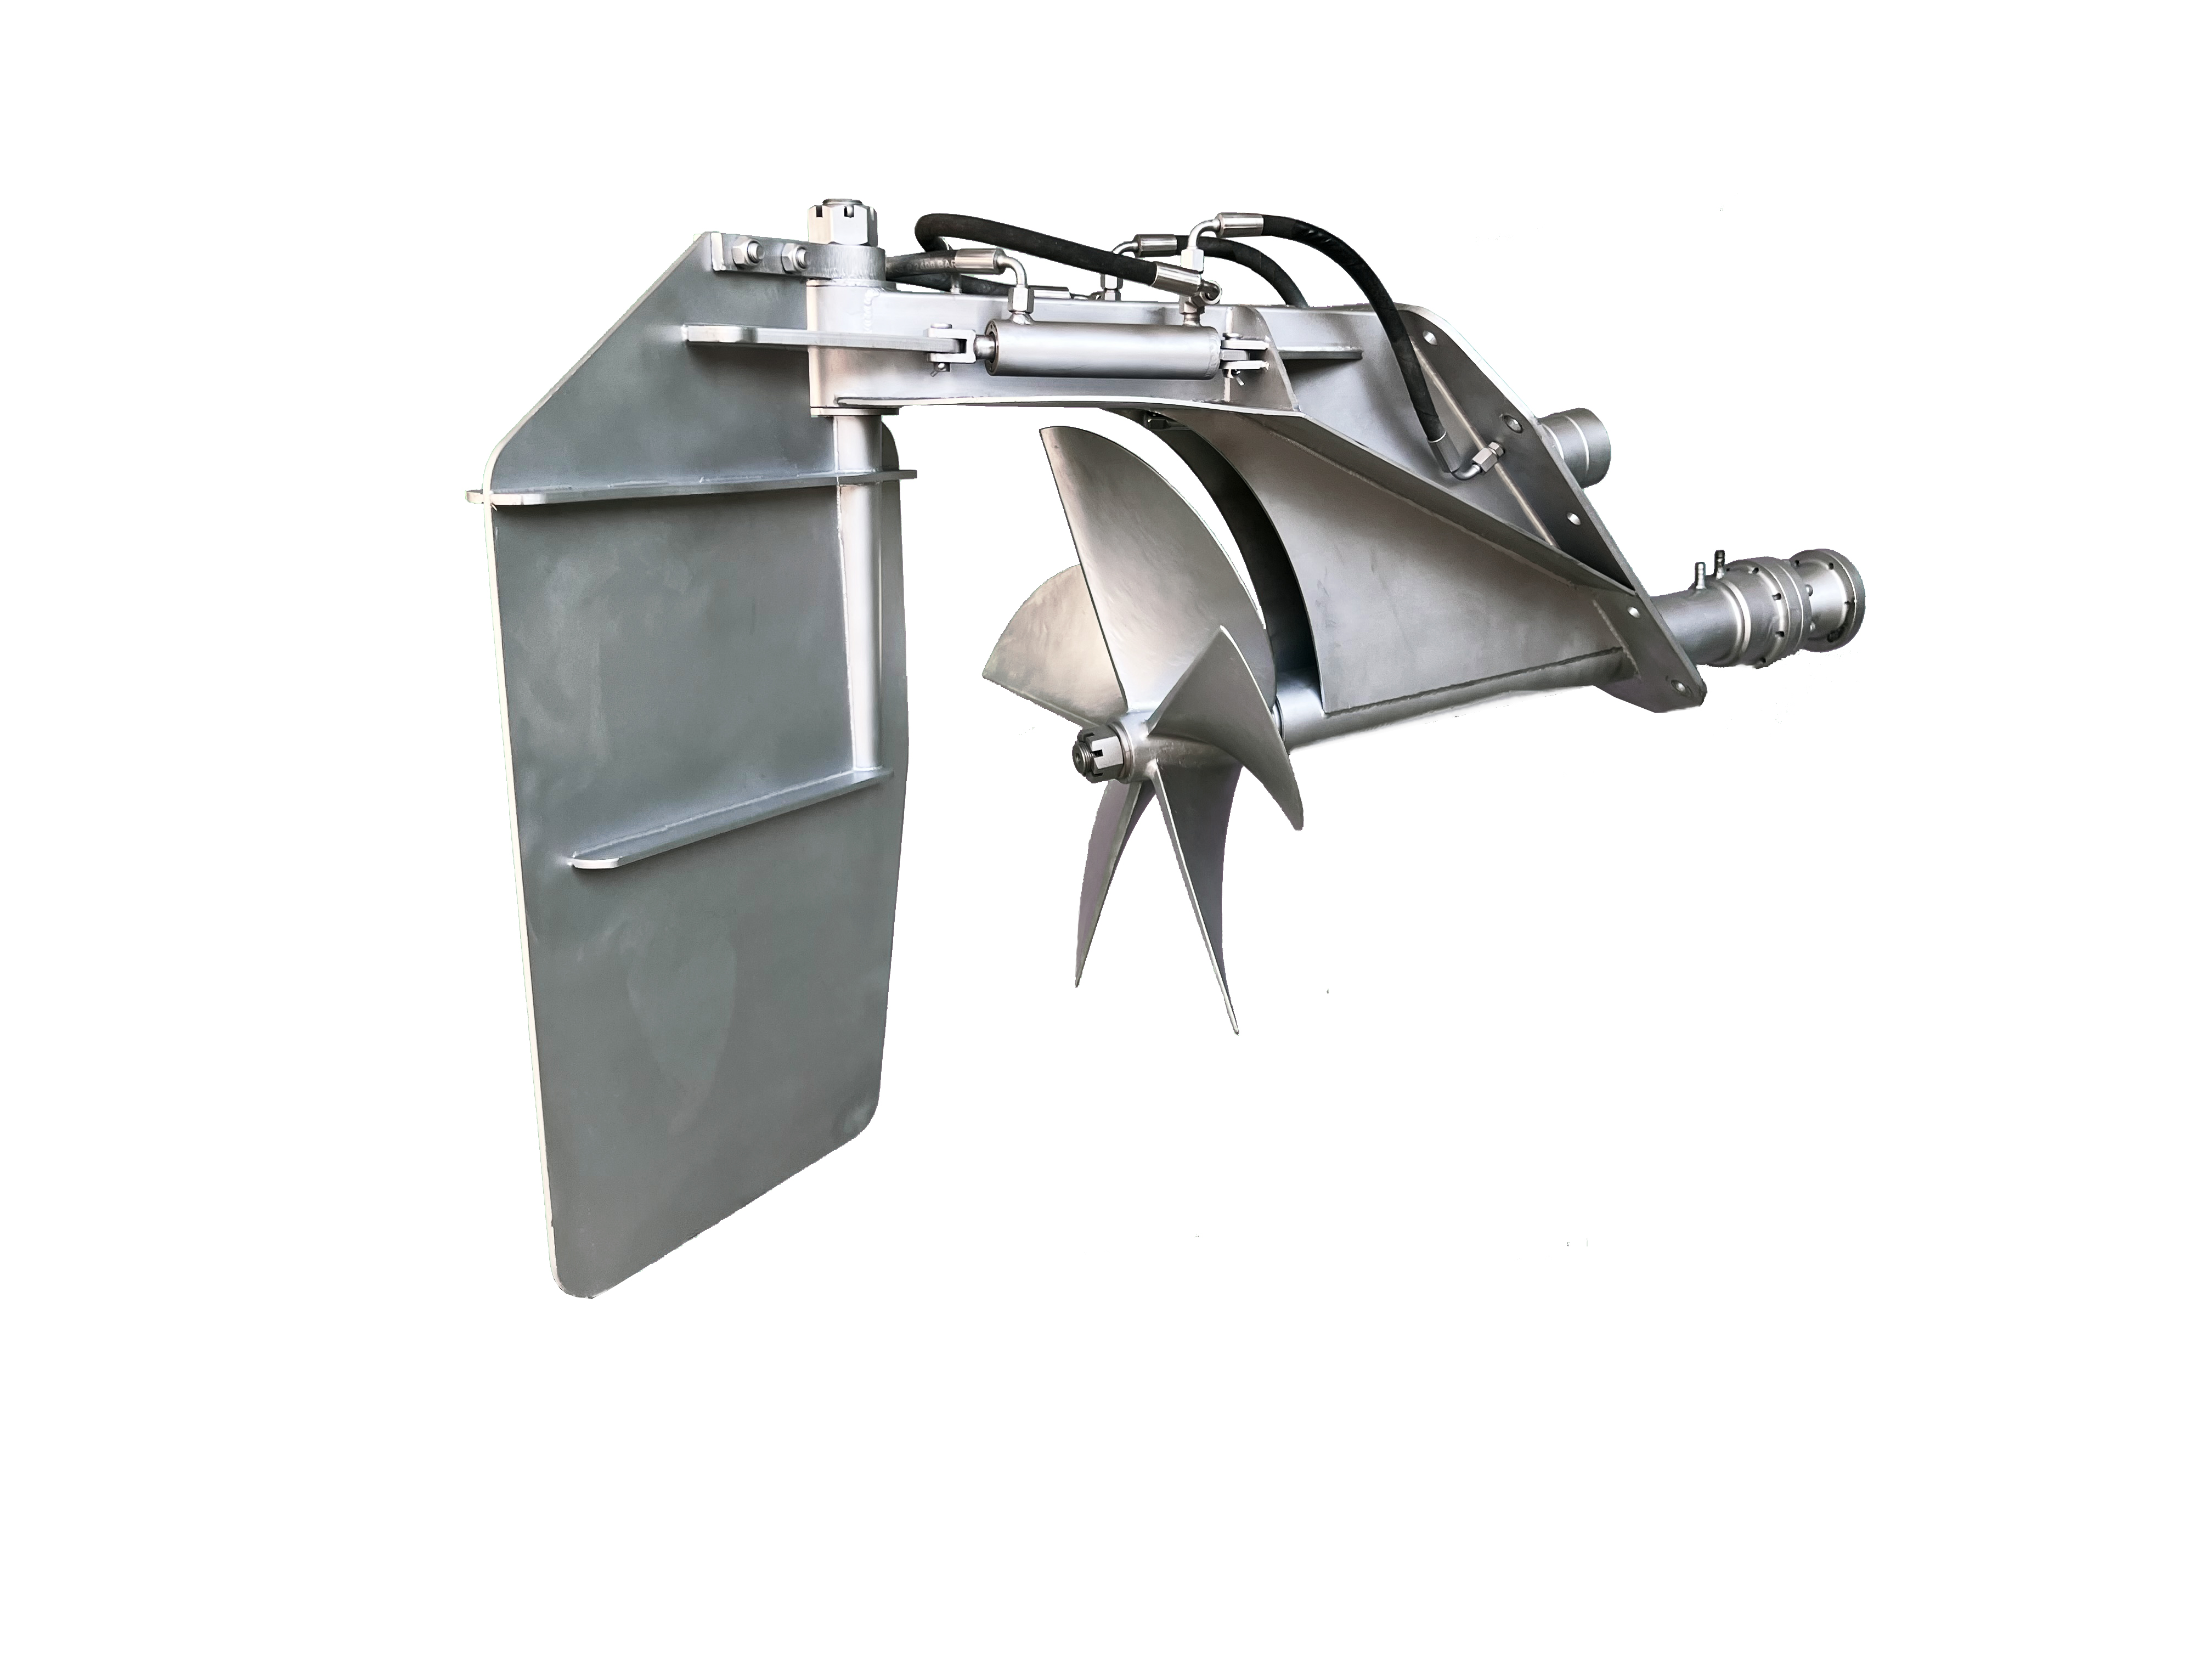 BG550 Marine Propeller High Efficiency Surface Drive System With Ship Engine